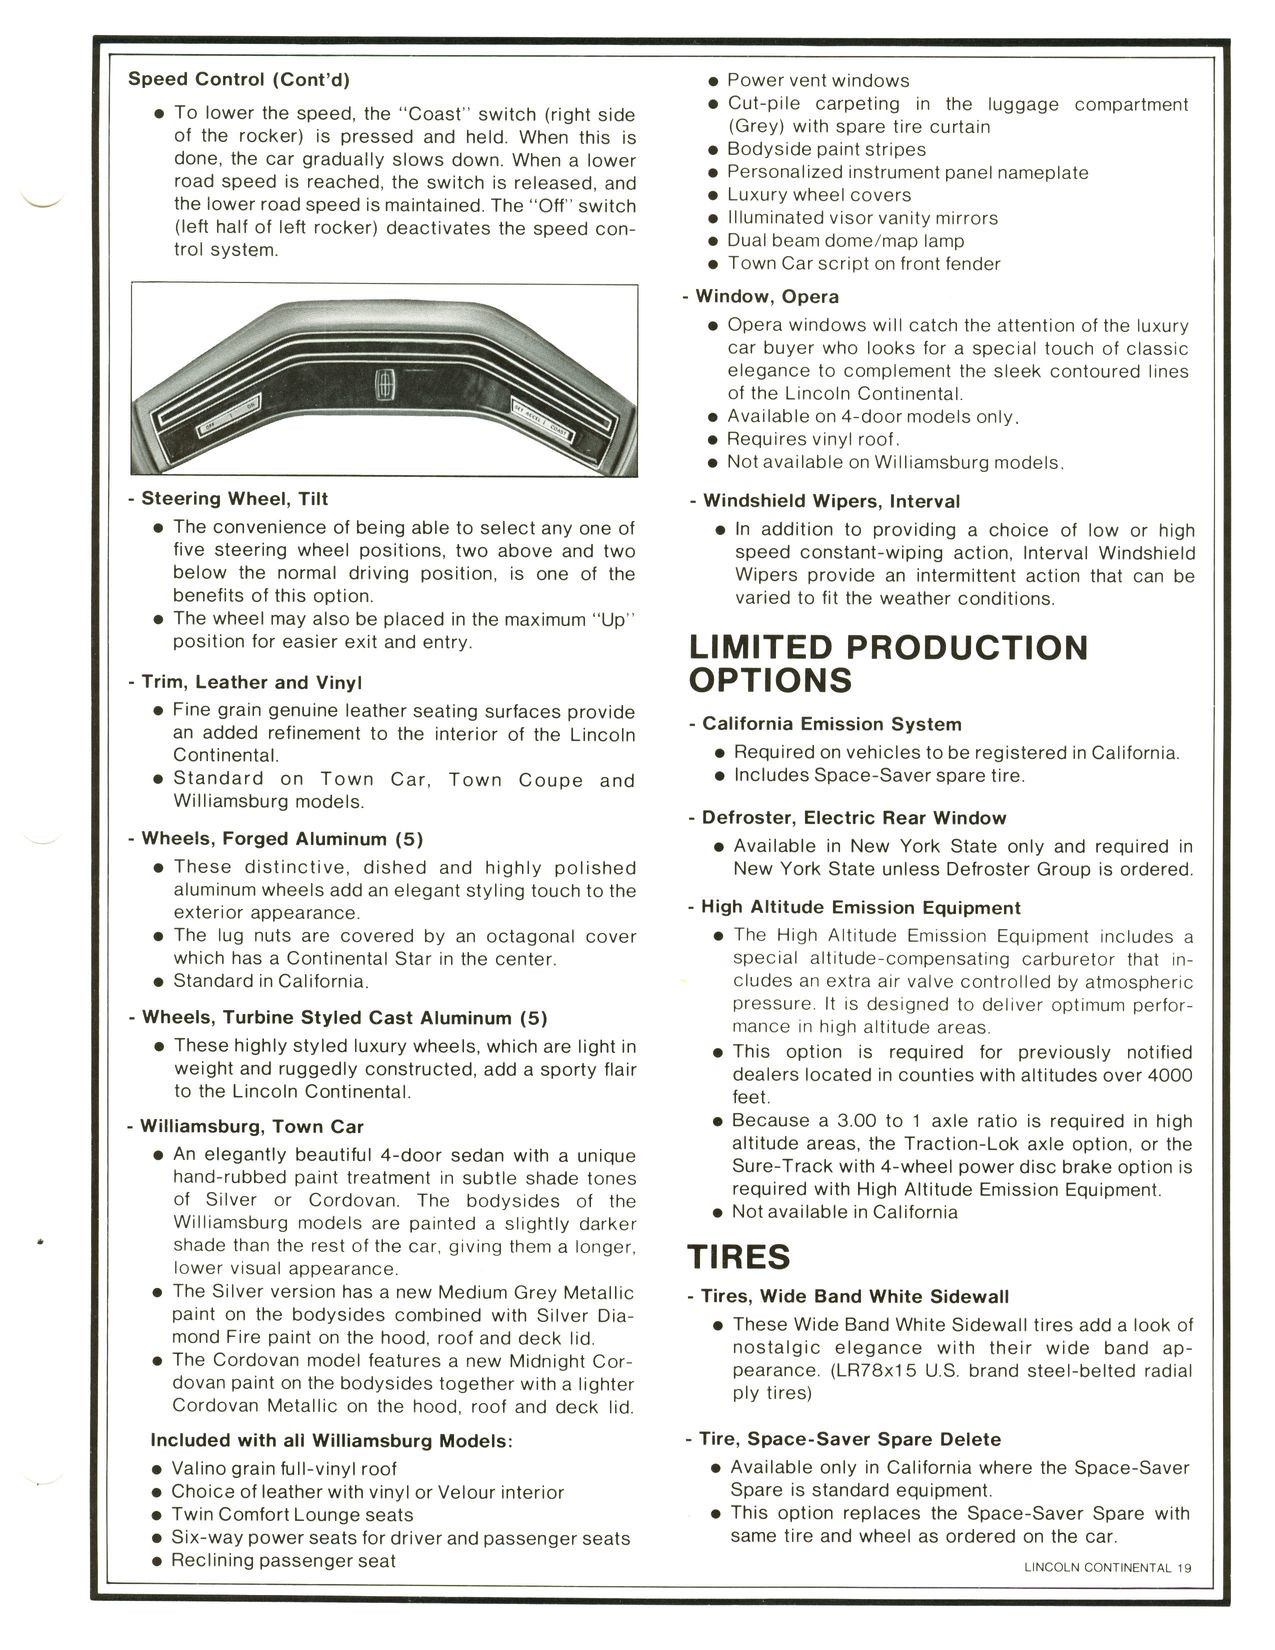 1977 Continental Product Facts Book-2-19